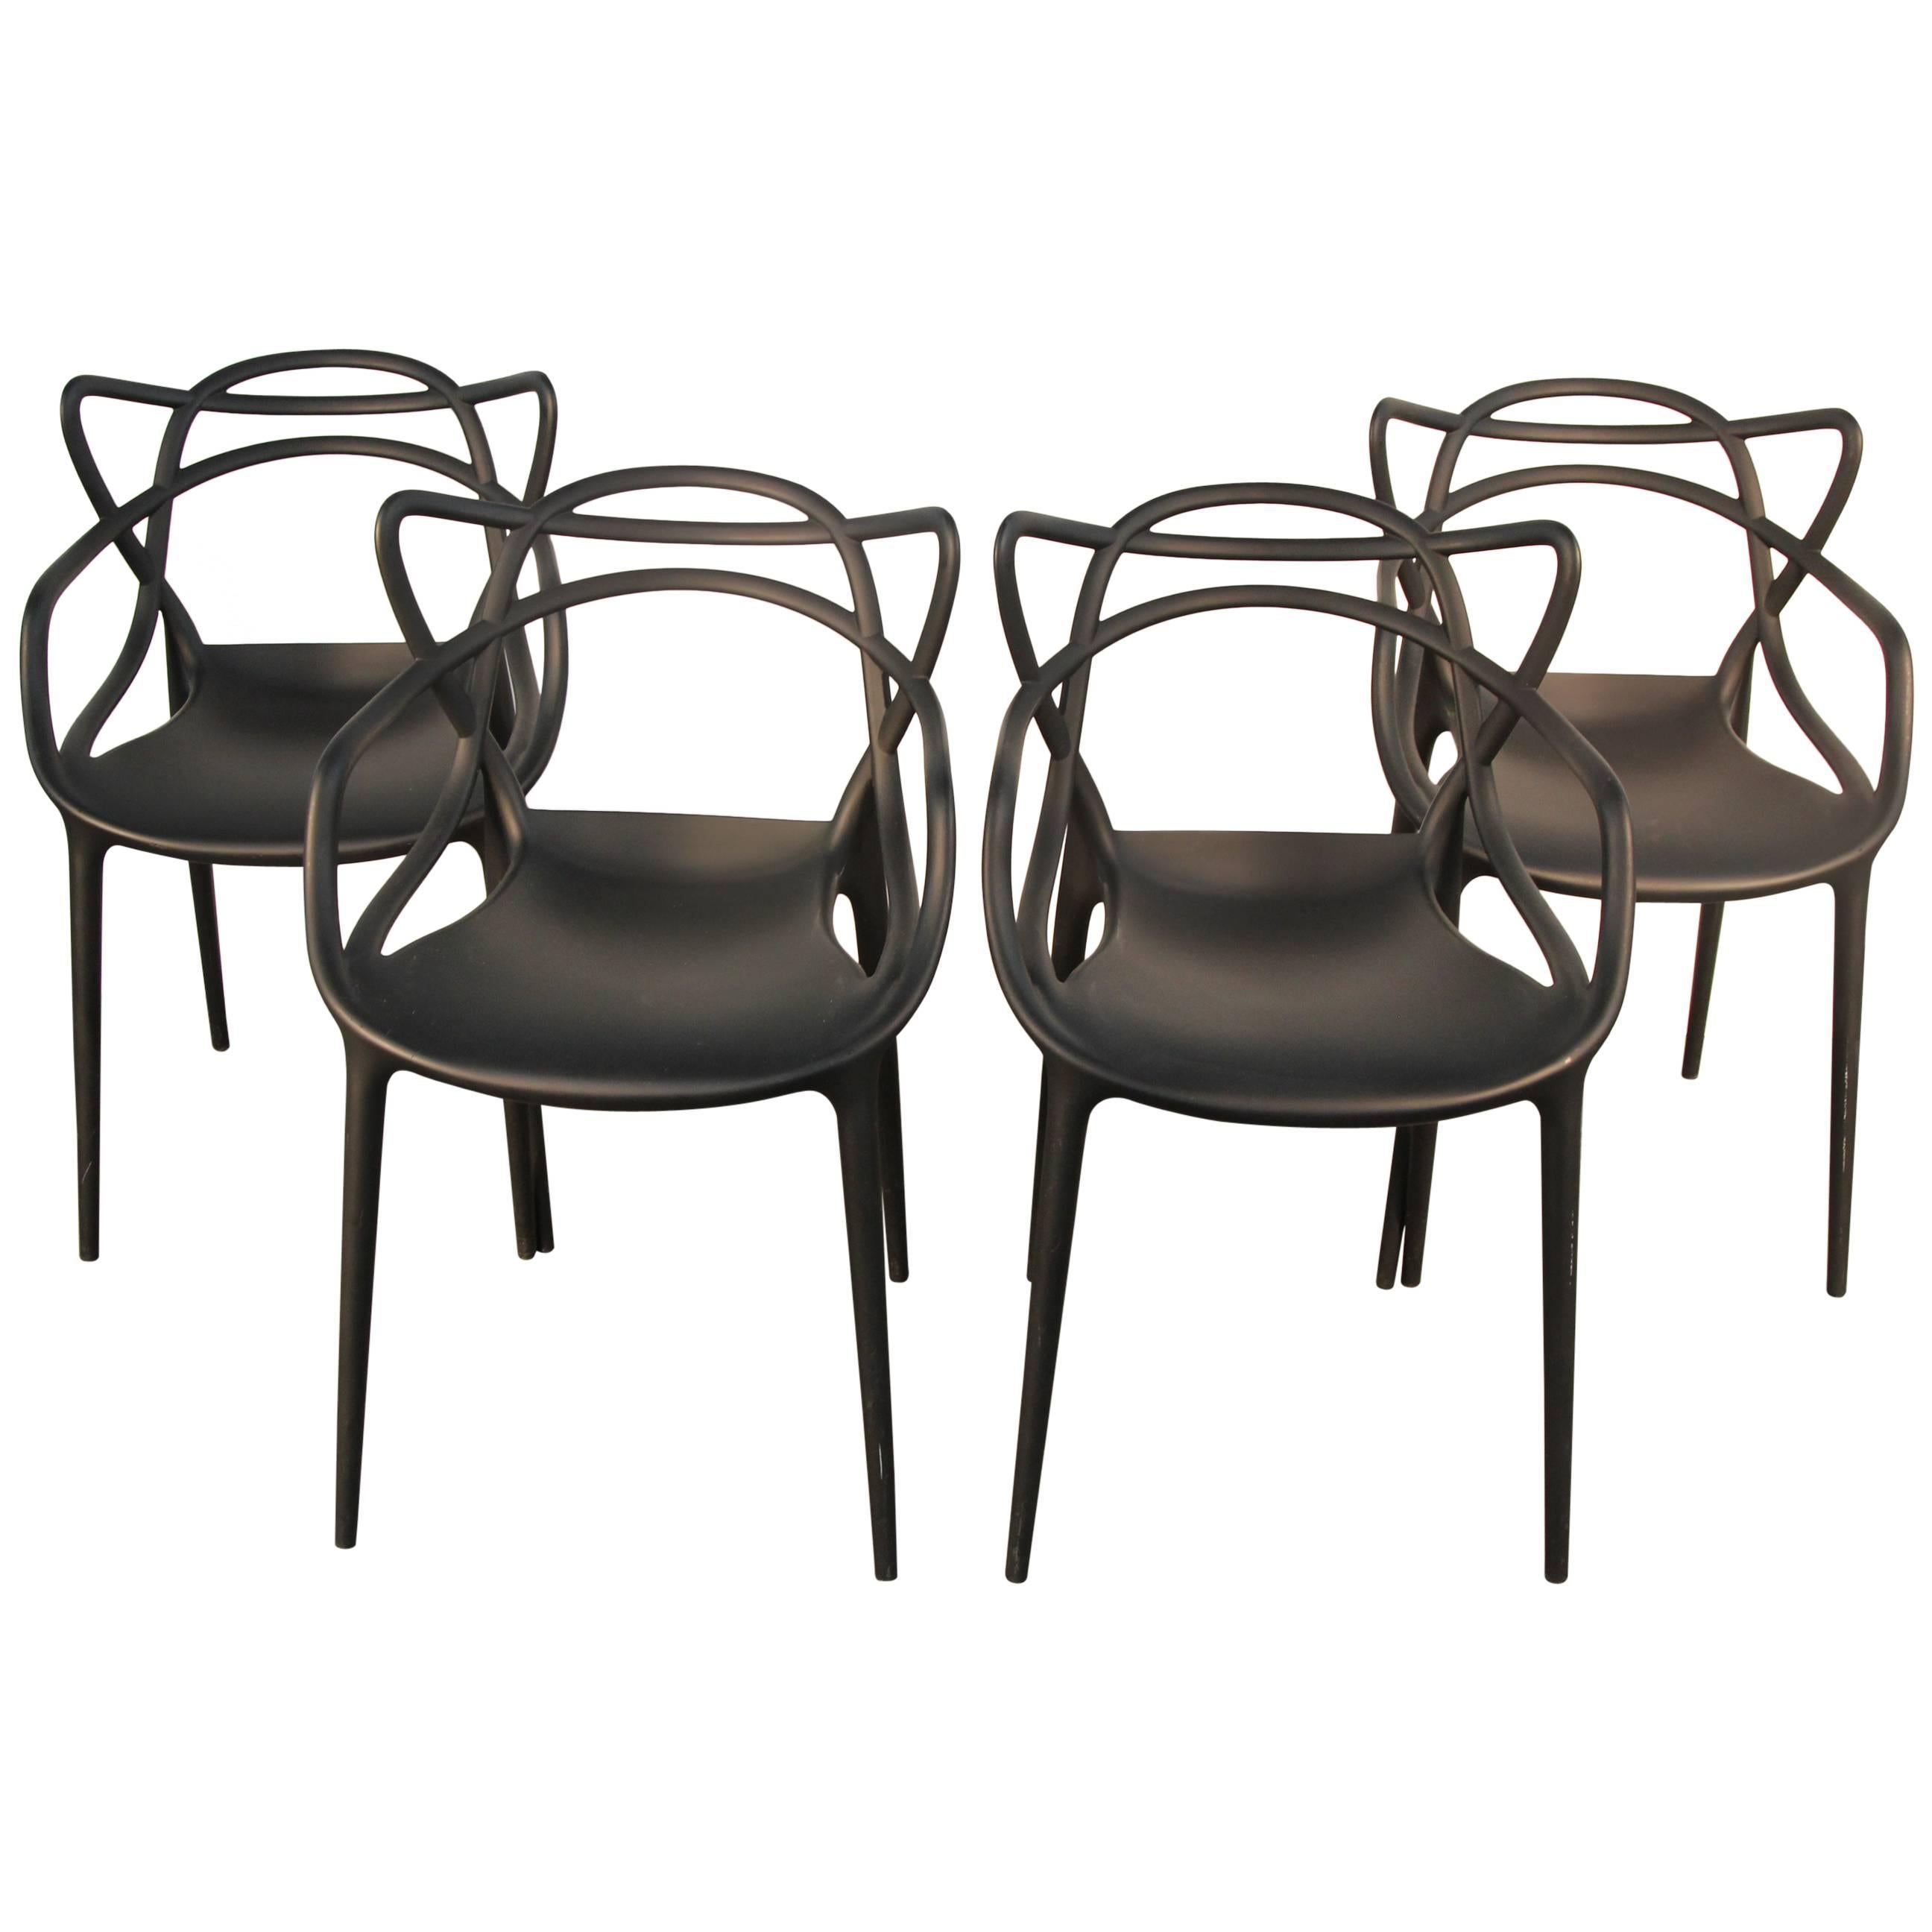 Philippe Starck and Eugeni Quitllet for Kartell Masters Chairs, Set of Four